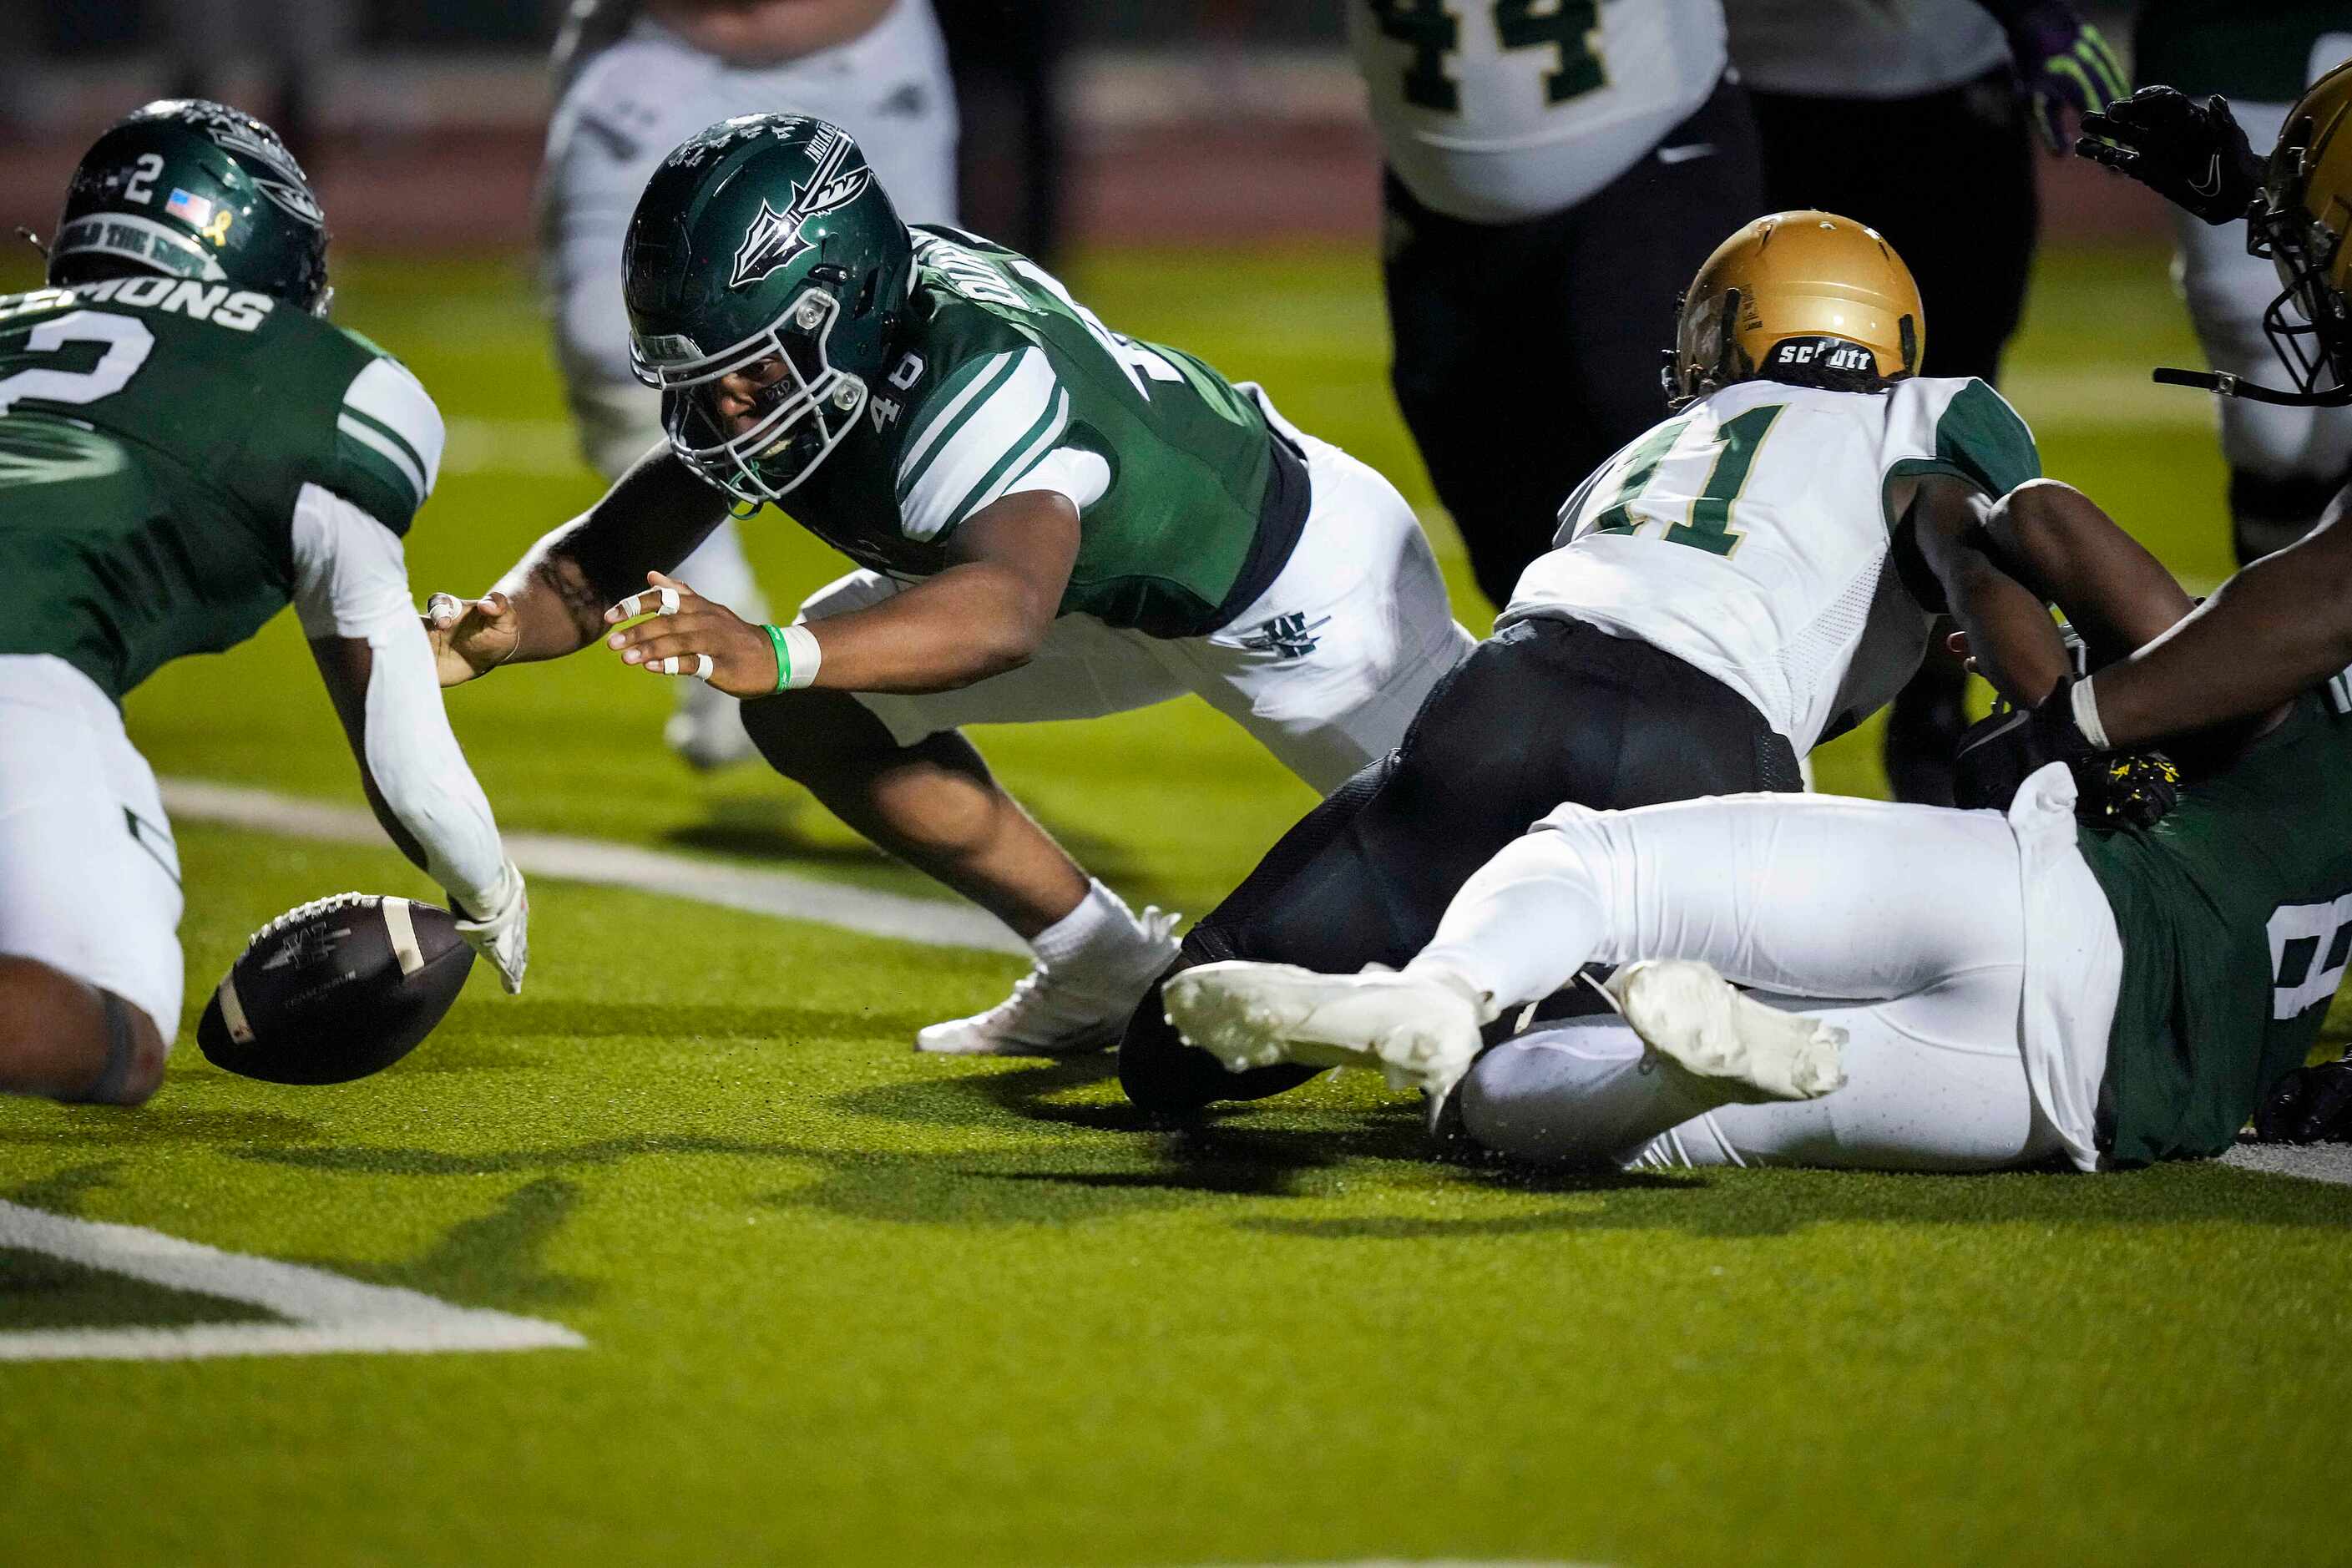 Waxahachie running backs Wade Lemons (2) and Joshua Durham (48) dive for a fumble in the end...